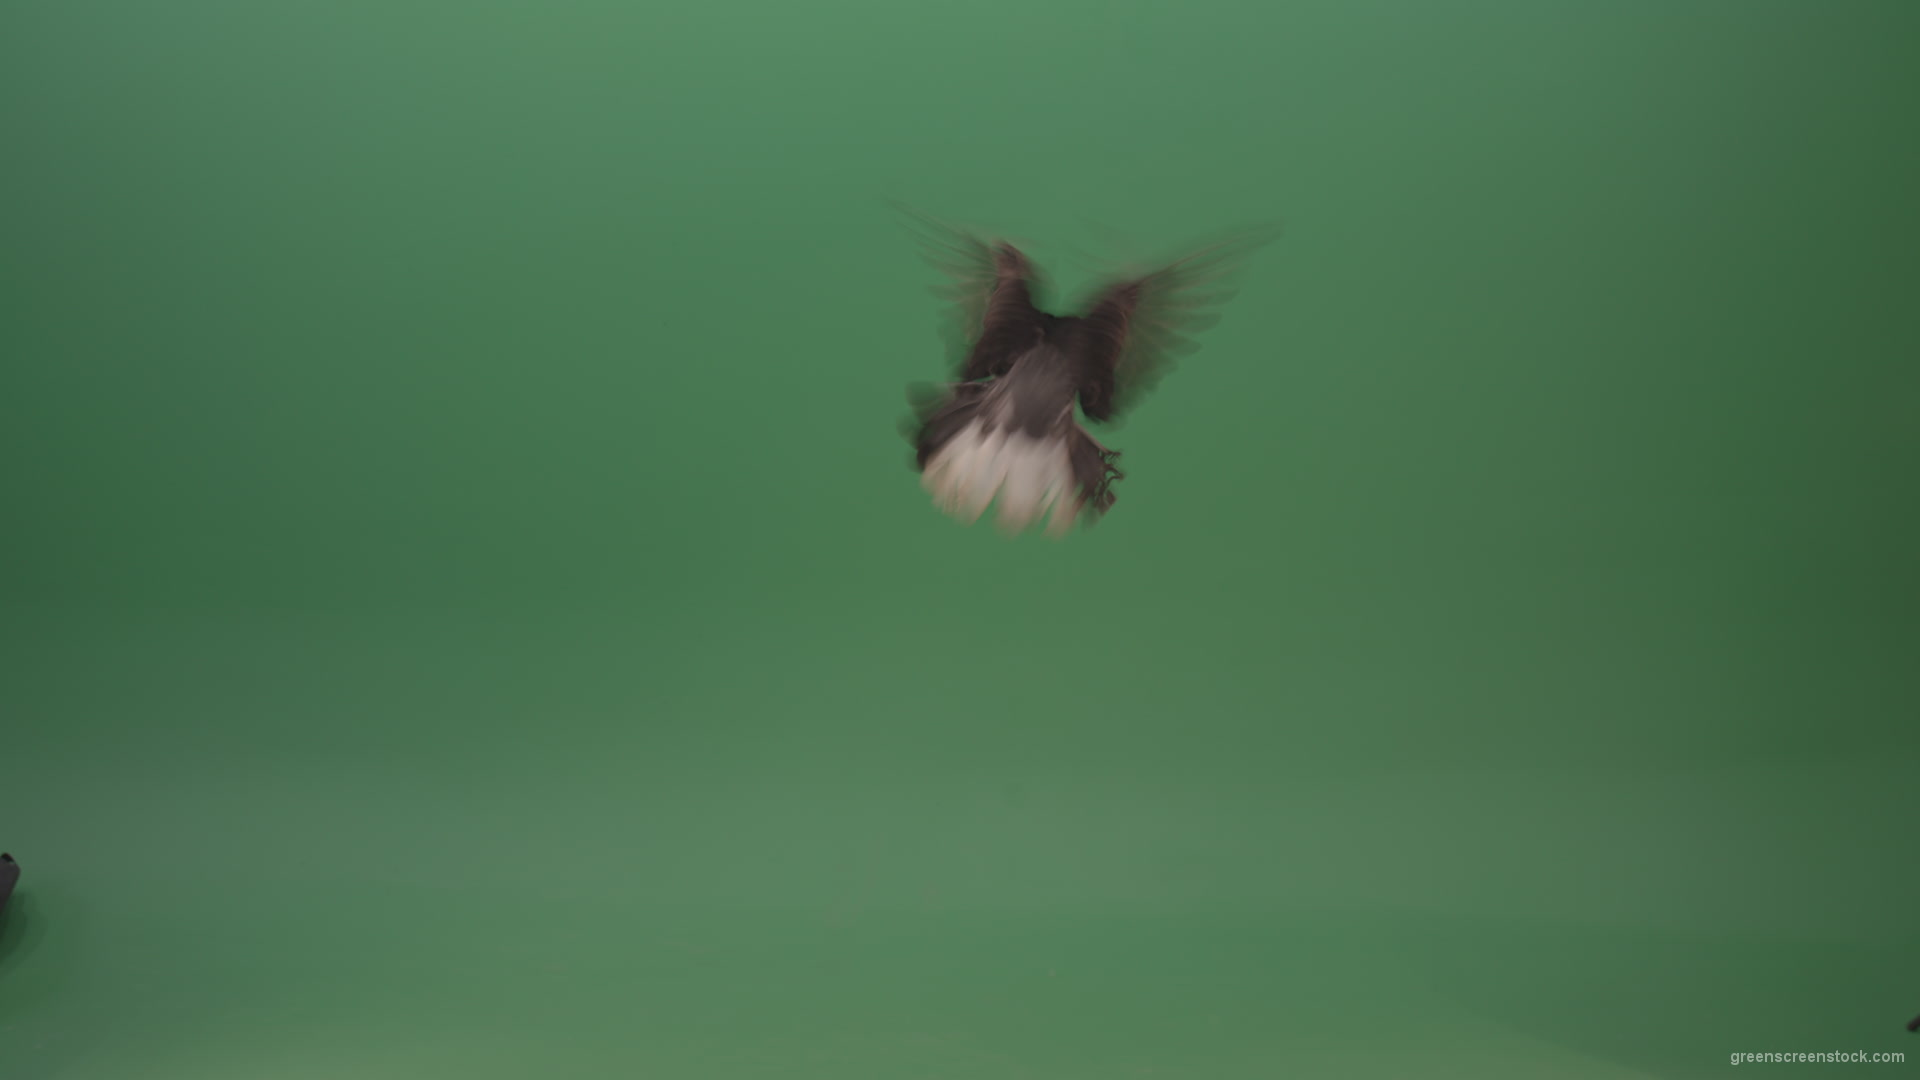 Raft-of-a-gray-pigeon-in-a-circle-of-landing-isolated-on-green-screen_005 Green Screen Stock